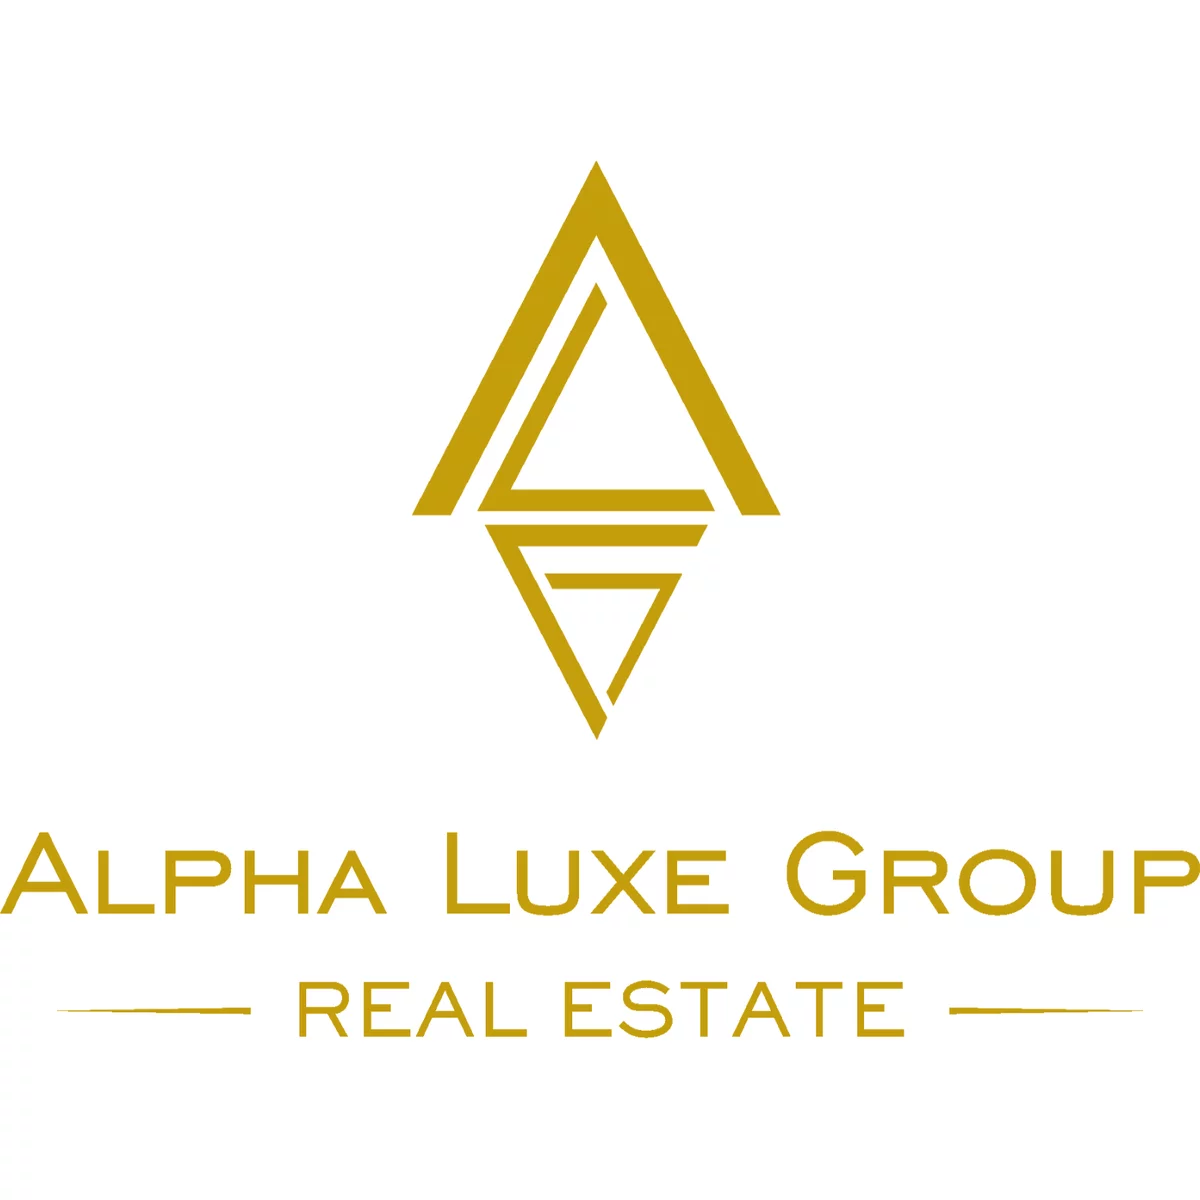 ALPHA LUXE GROUP IMMOBILIEN